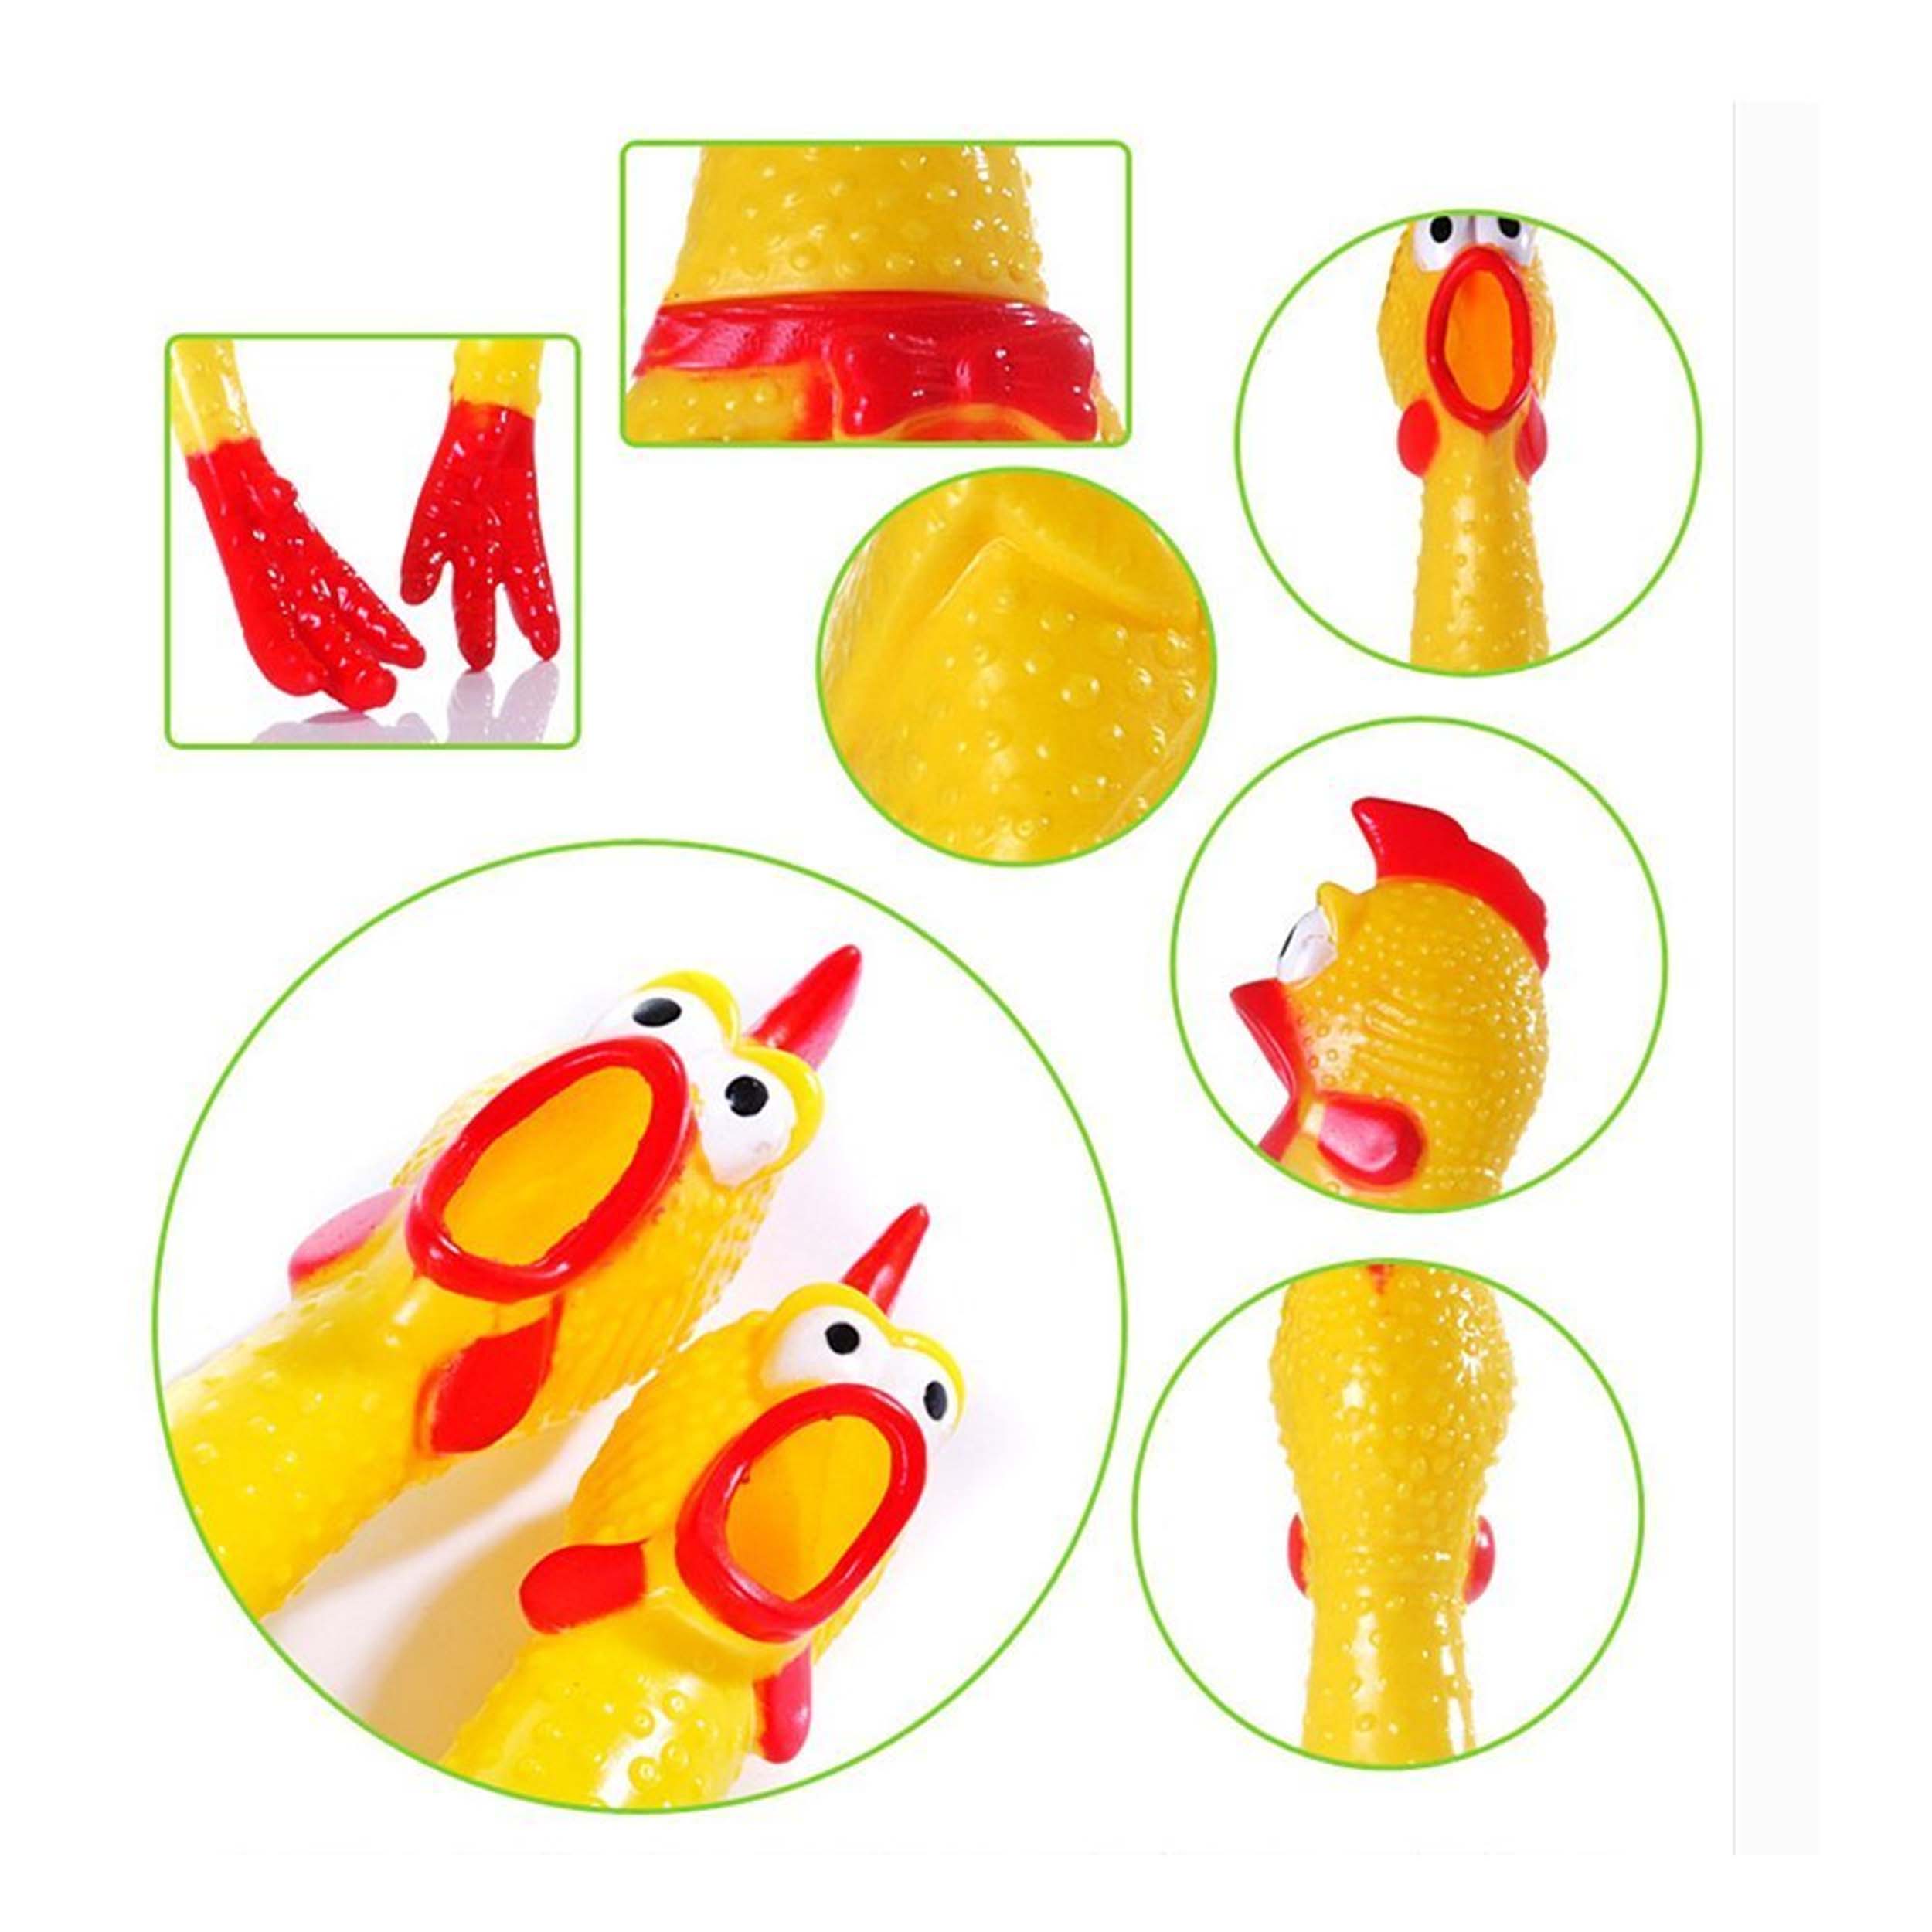 14 Inch Screaming Rubber Chicken - Funny Squeaky Toy